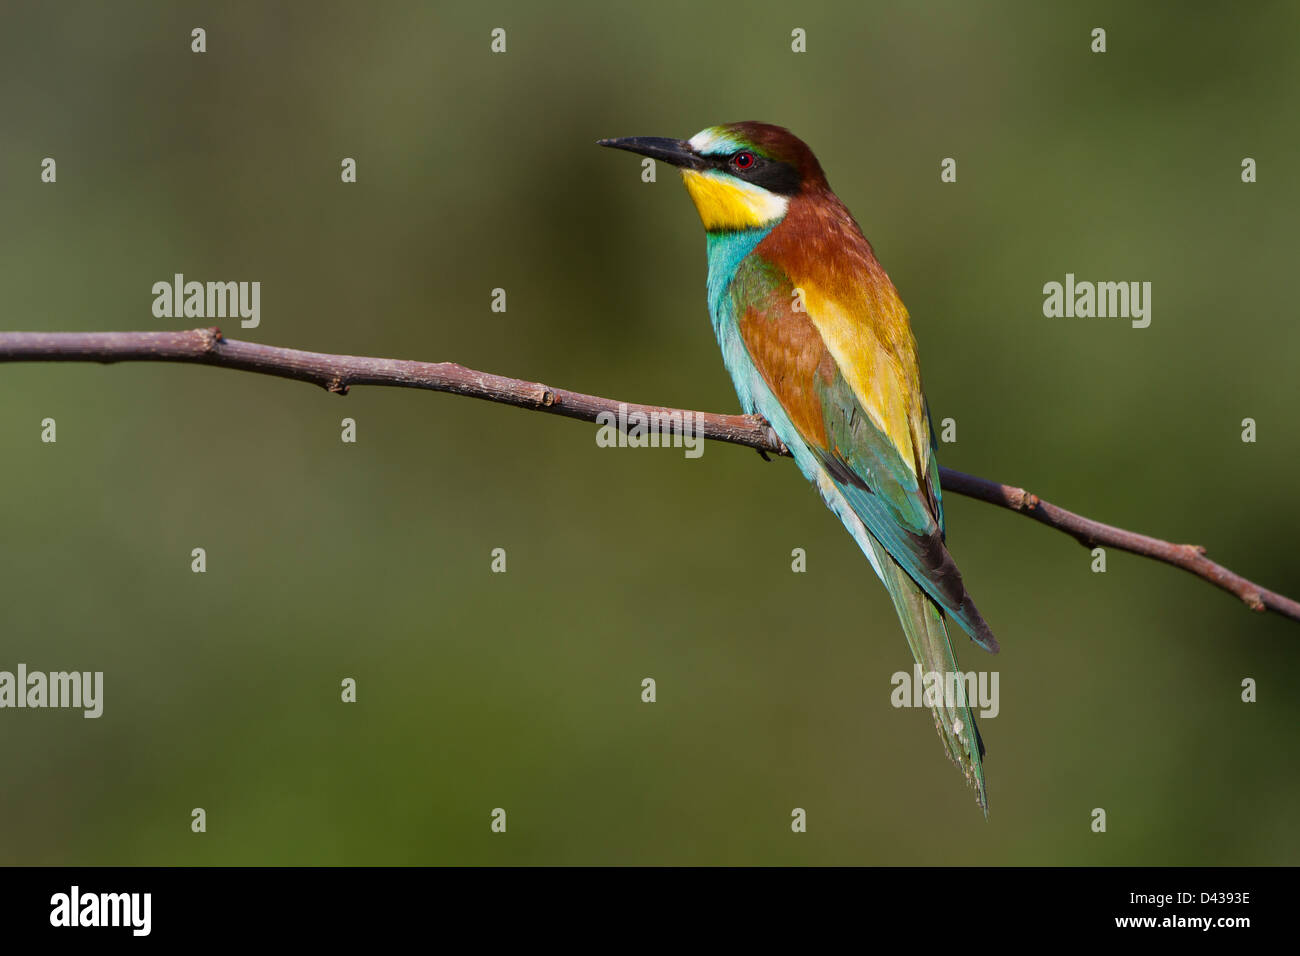 European bee-eater alighted on a branch. Stock Photo